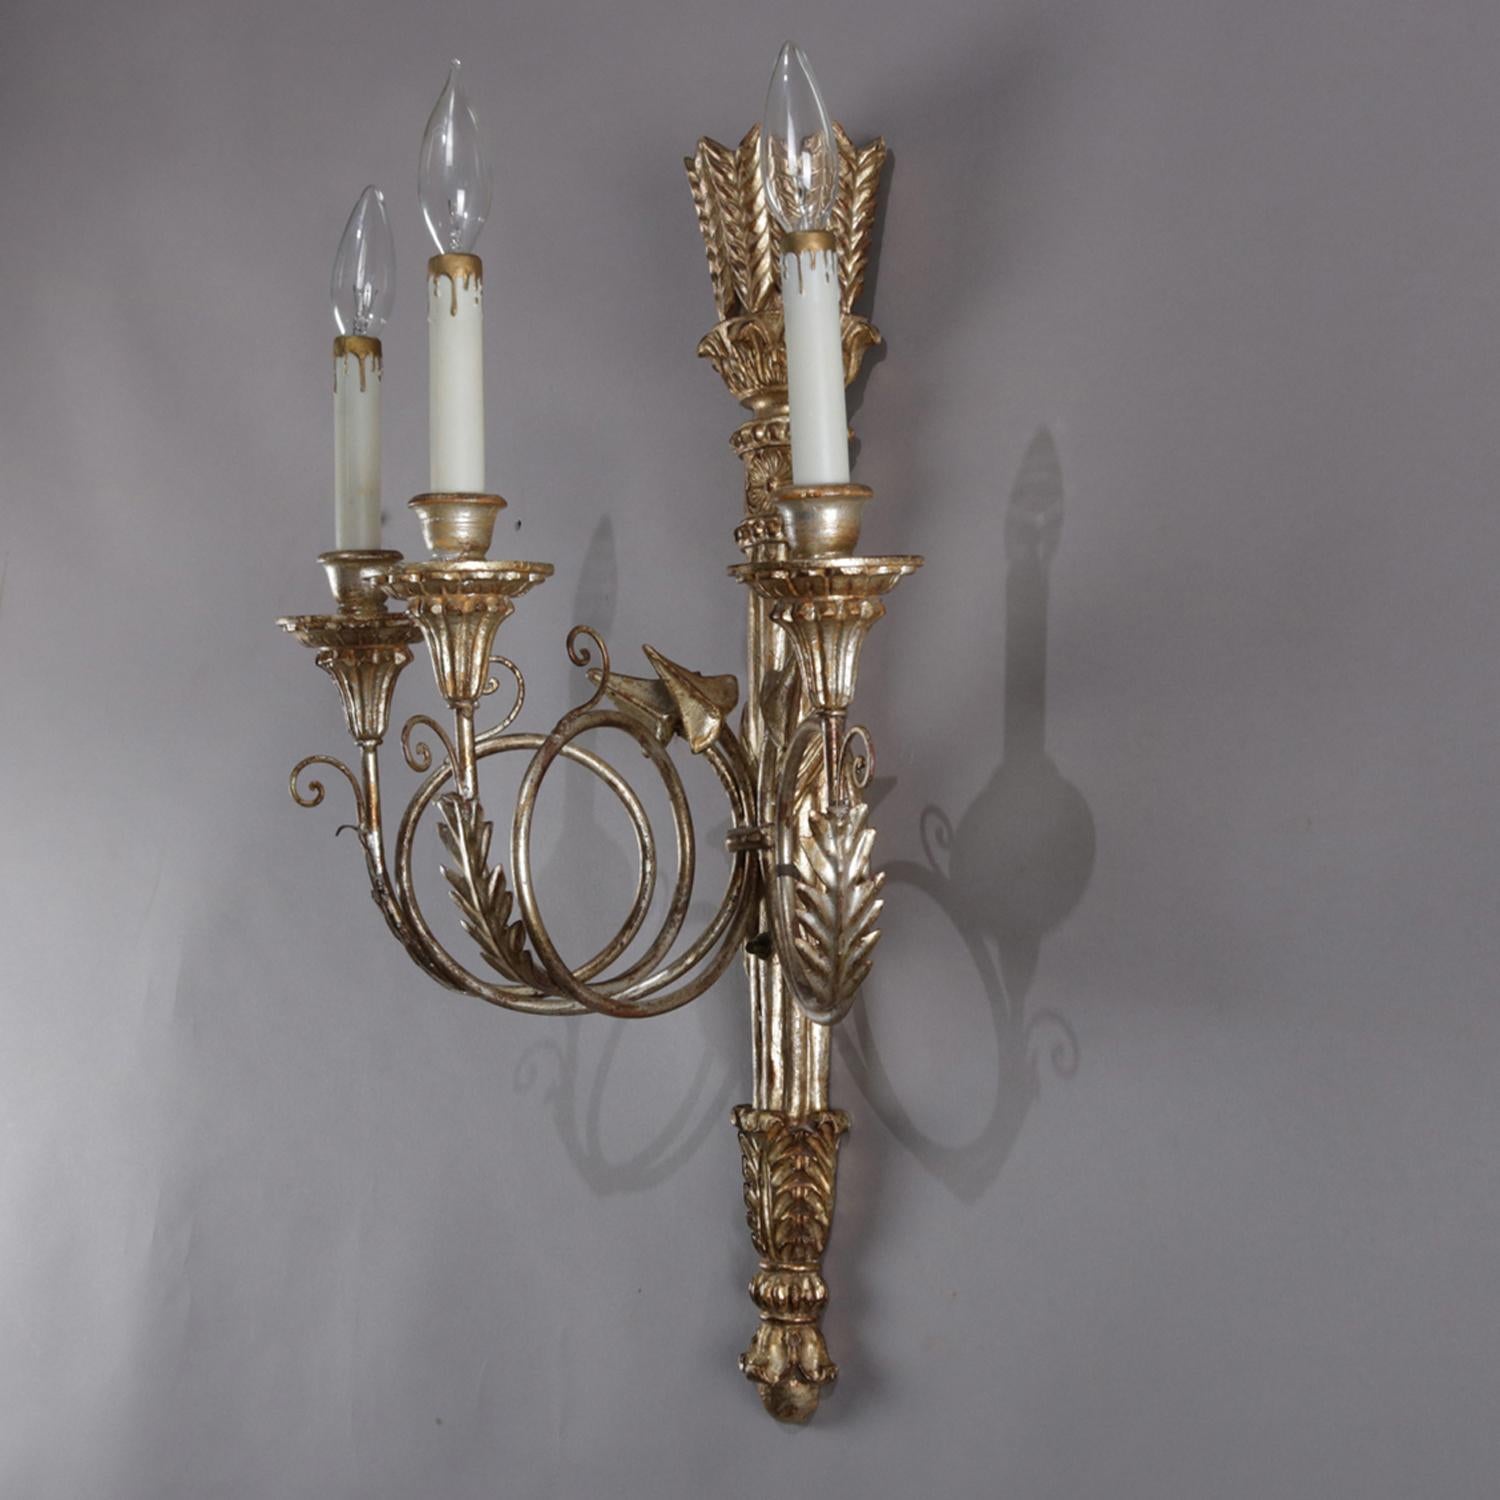 Pair of Classical French Empire Style Gilt Torchère Three-Light Wall Sconces 1